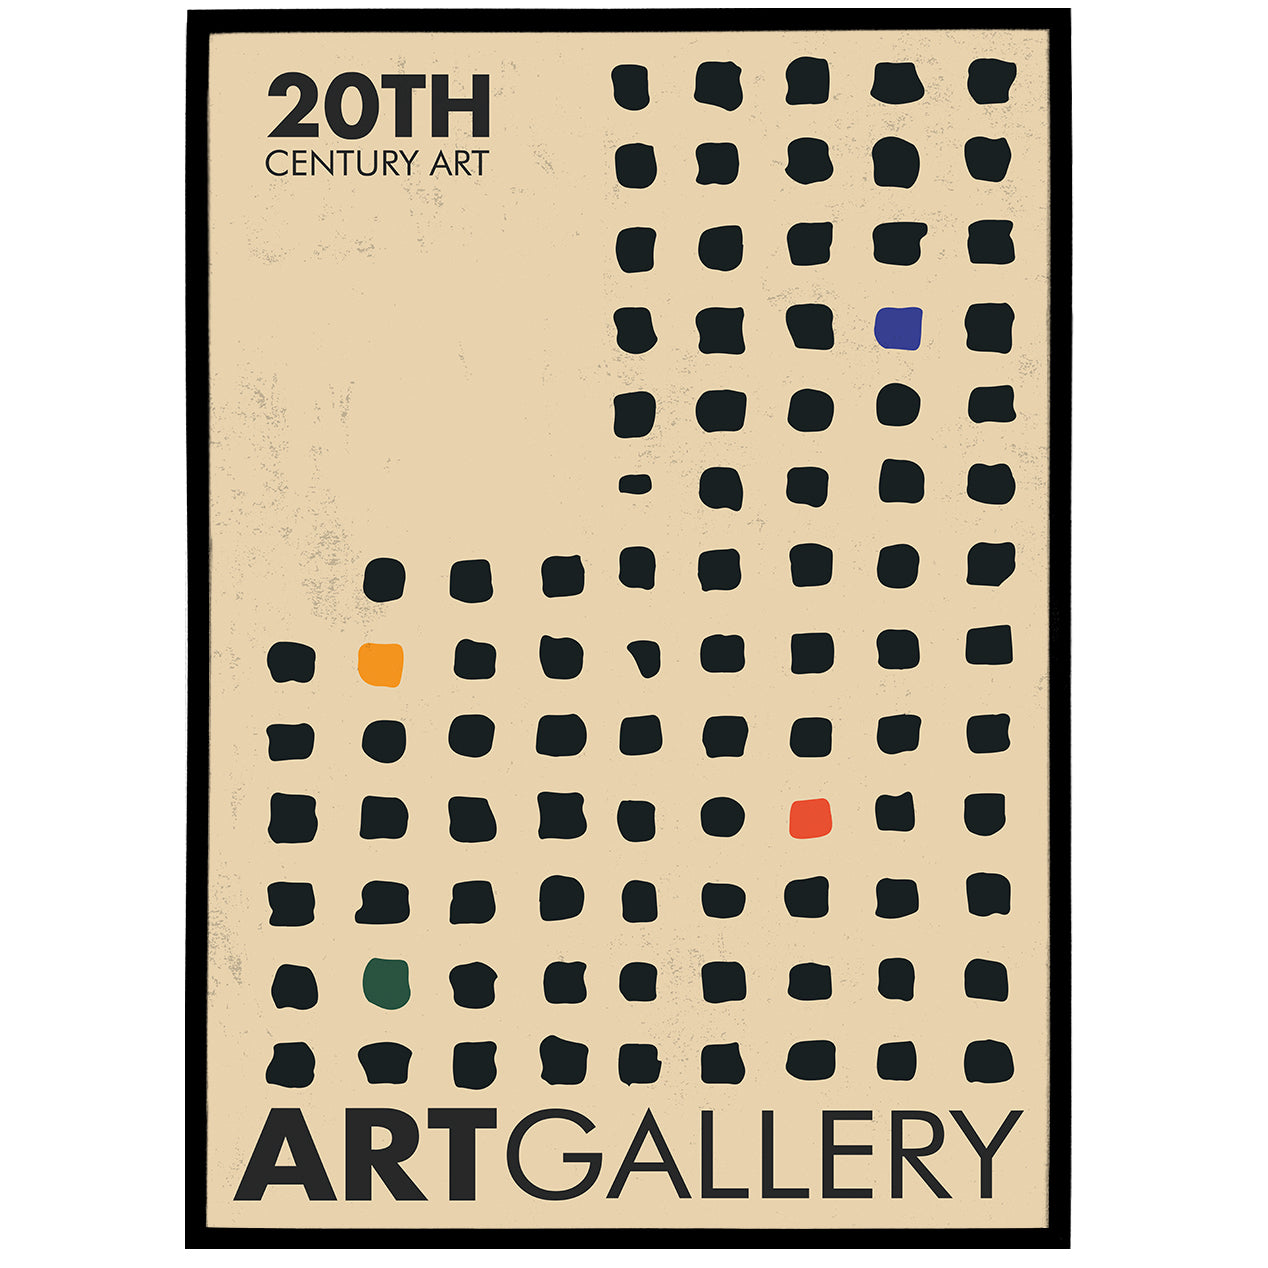 20th Art Gallery Poster